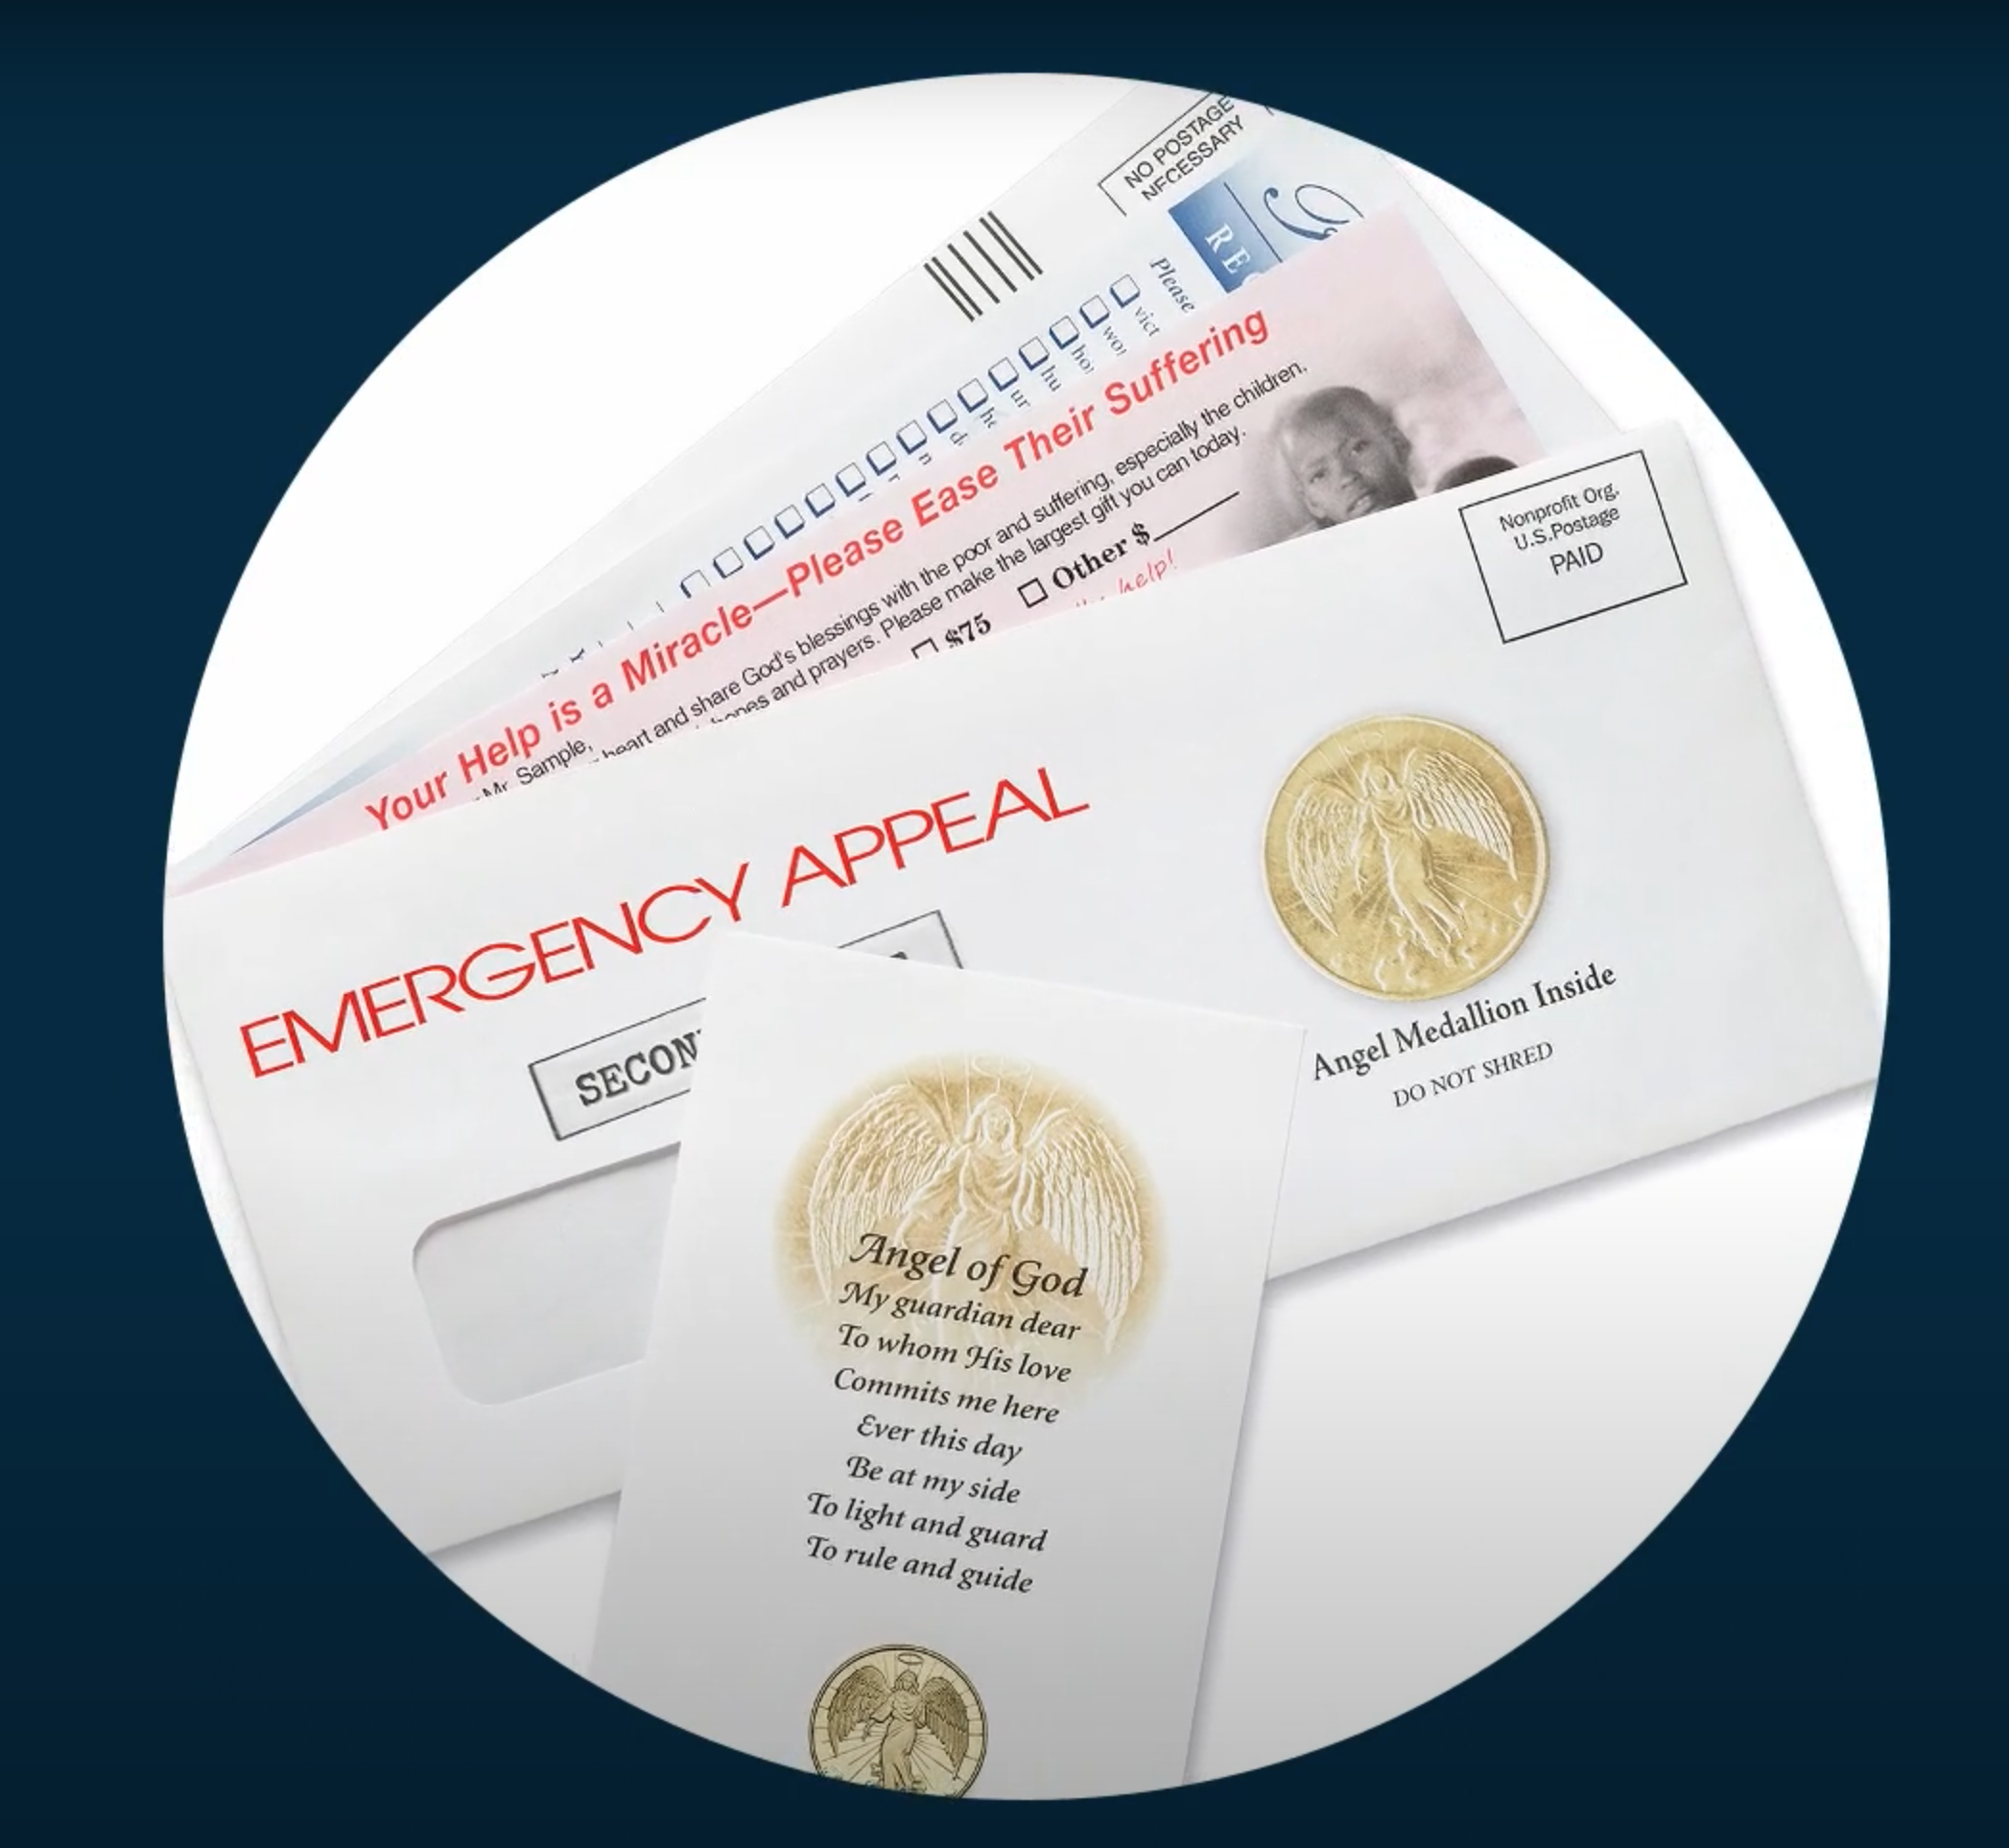 Fundraising with custom coins and direct mail